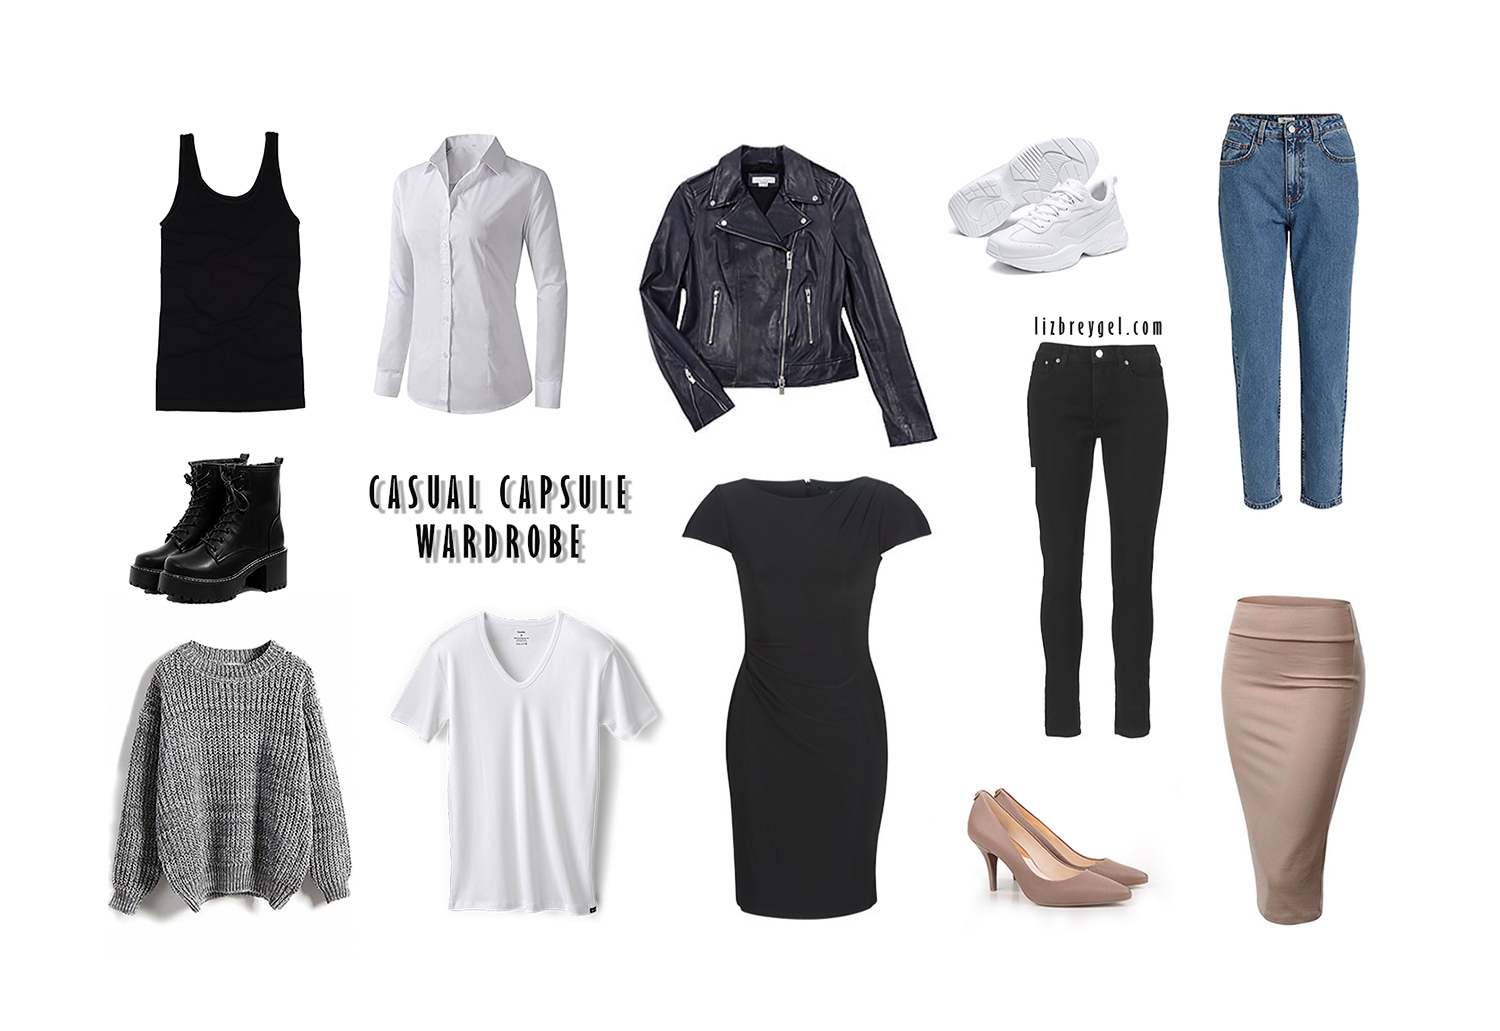 fashion collage with a few capsule wardrobe clothing essentials